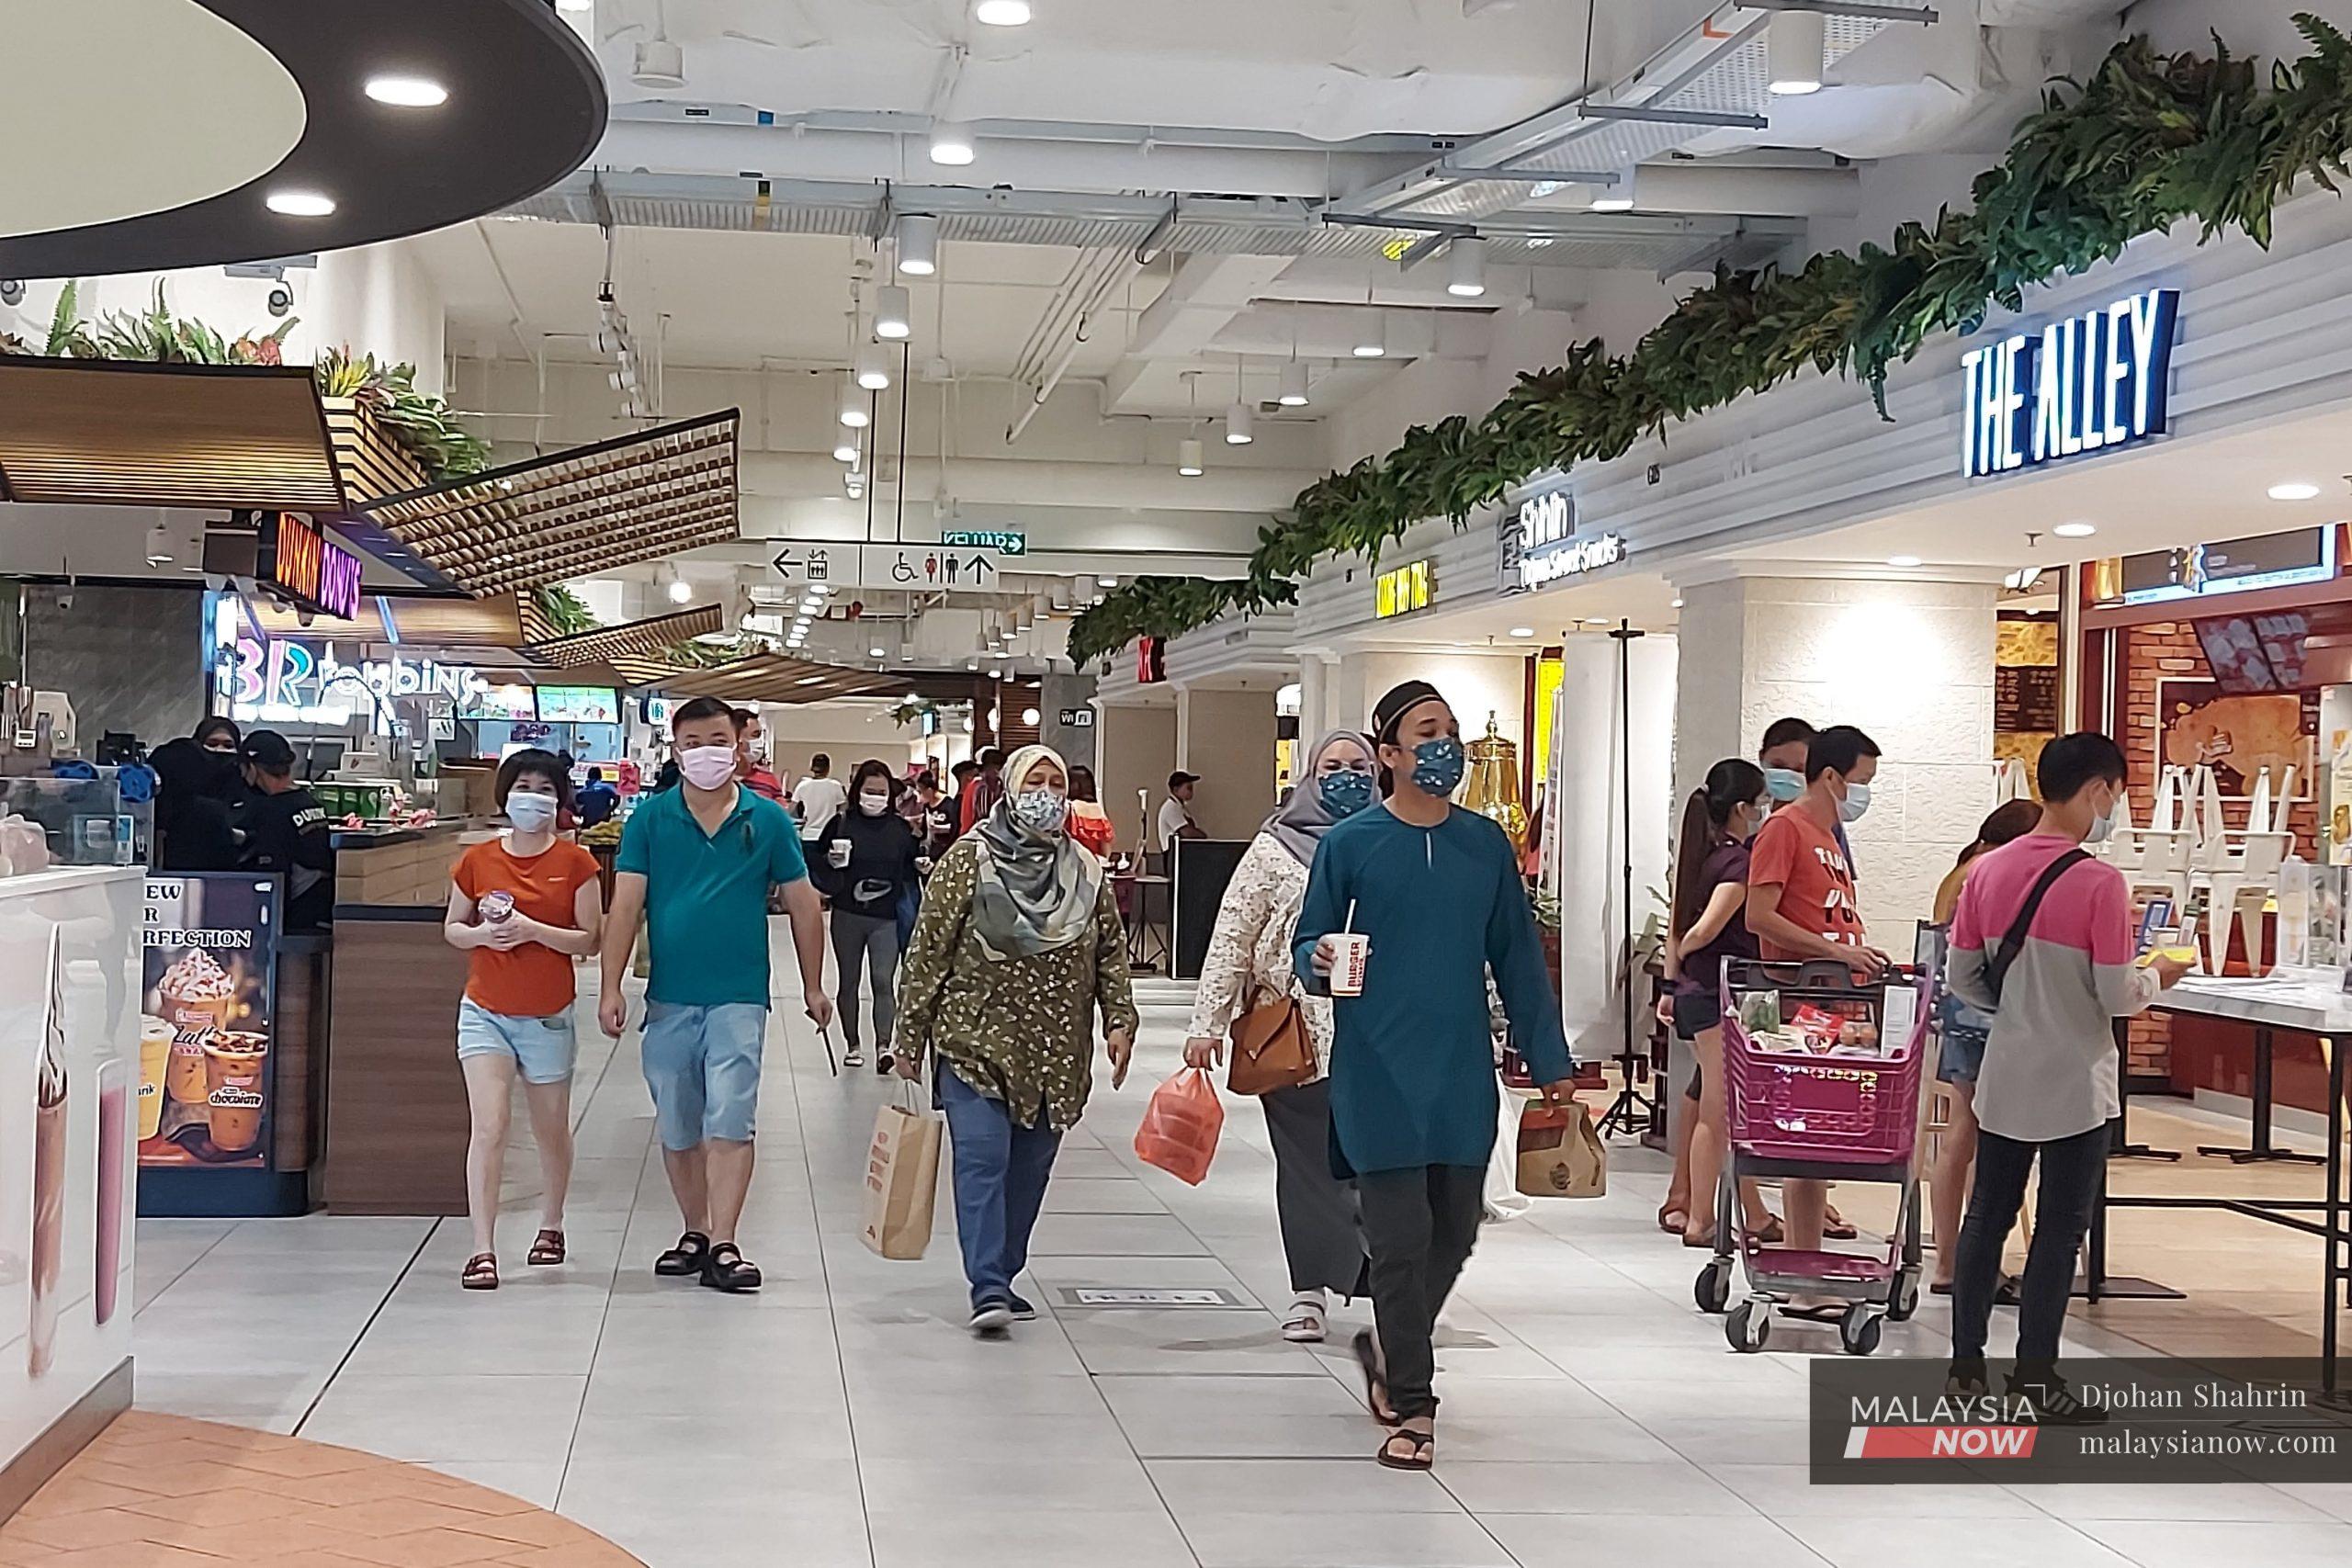 Shoppers stroll through a mall in Kuala Lumpur before the nationwide lockdown was imposed on June 1.